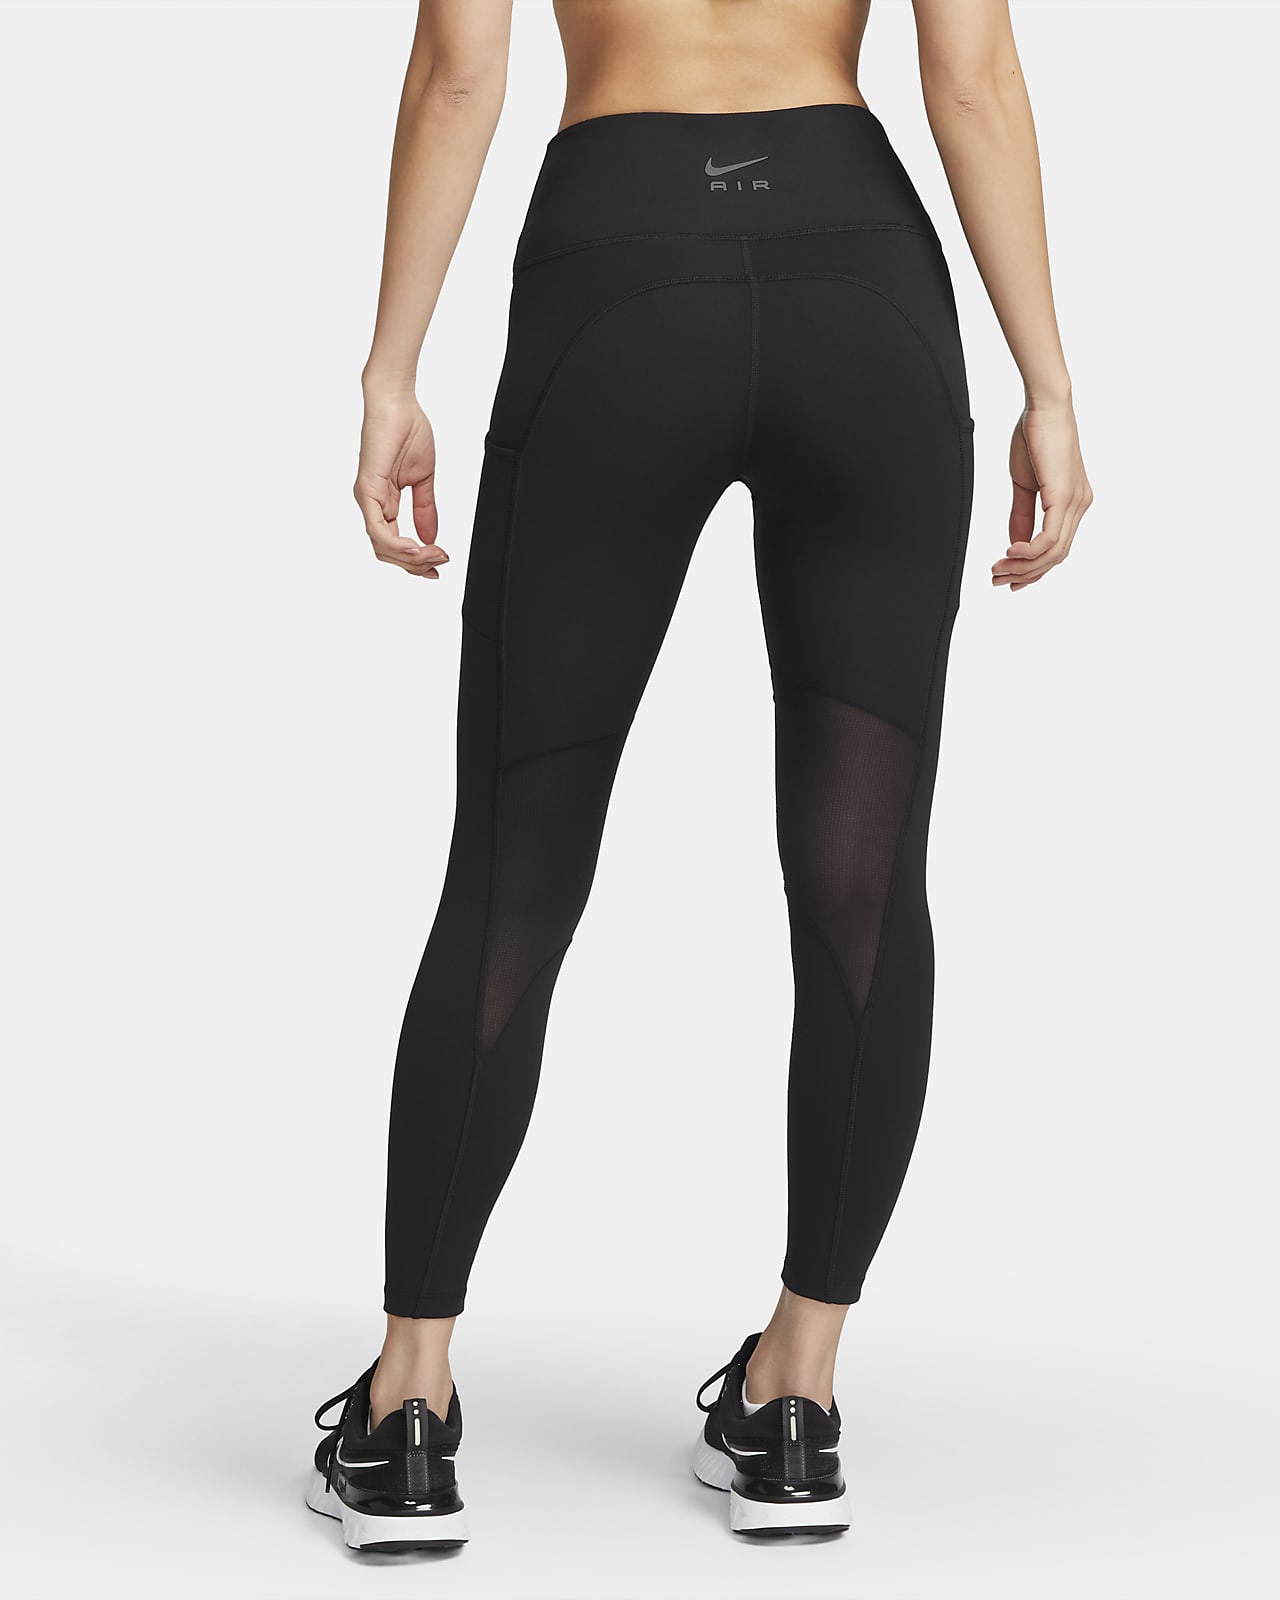 Mus joggen Inschrijven Nike Air Women's Mid-Rise 7/8 Running Leggings with Pockets. Nike ID